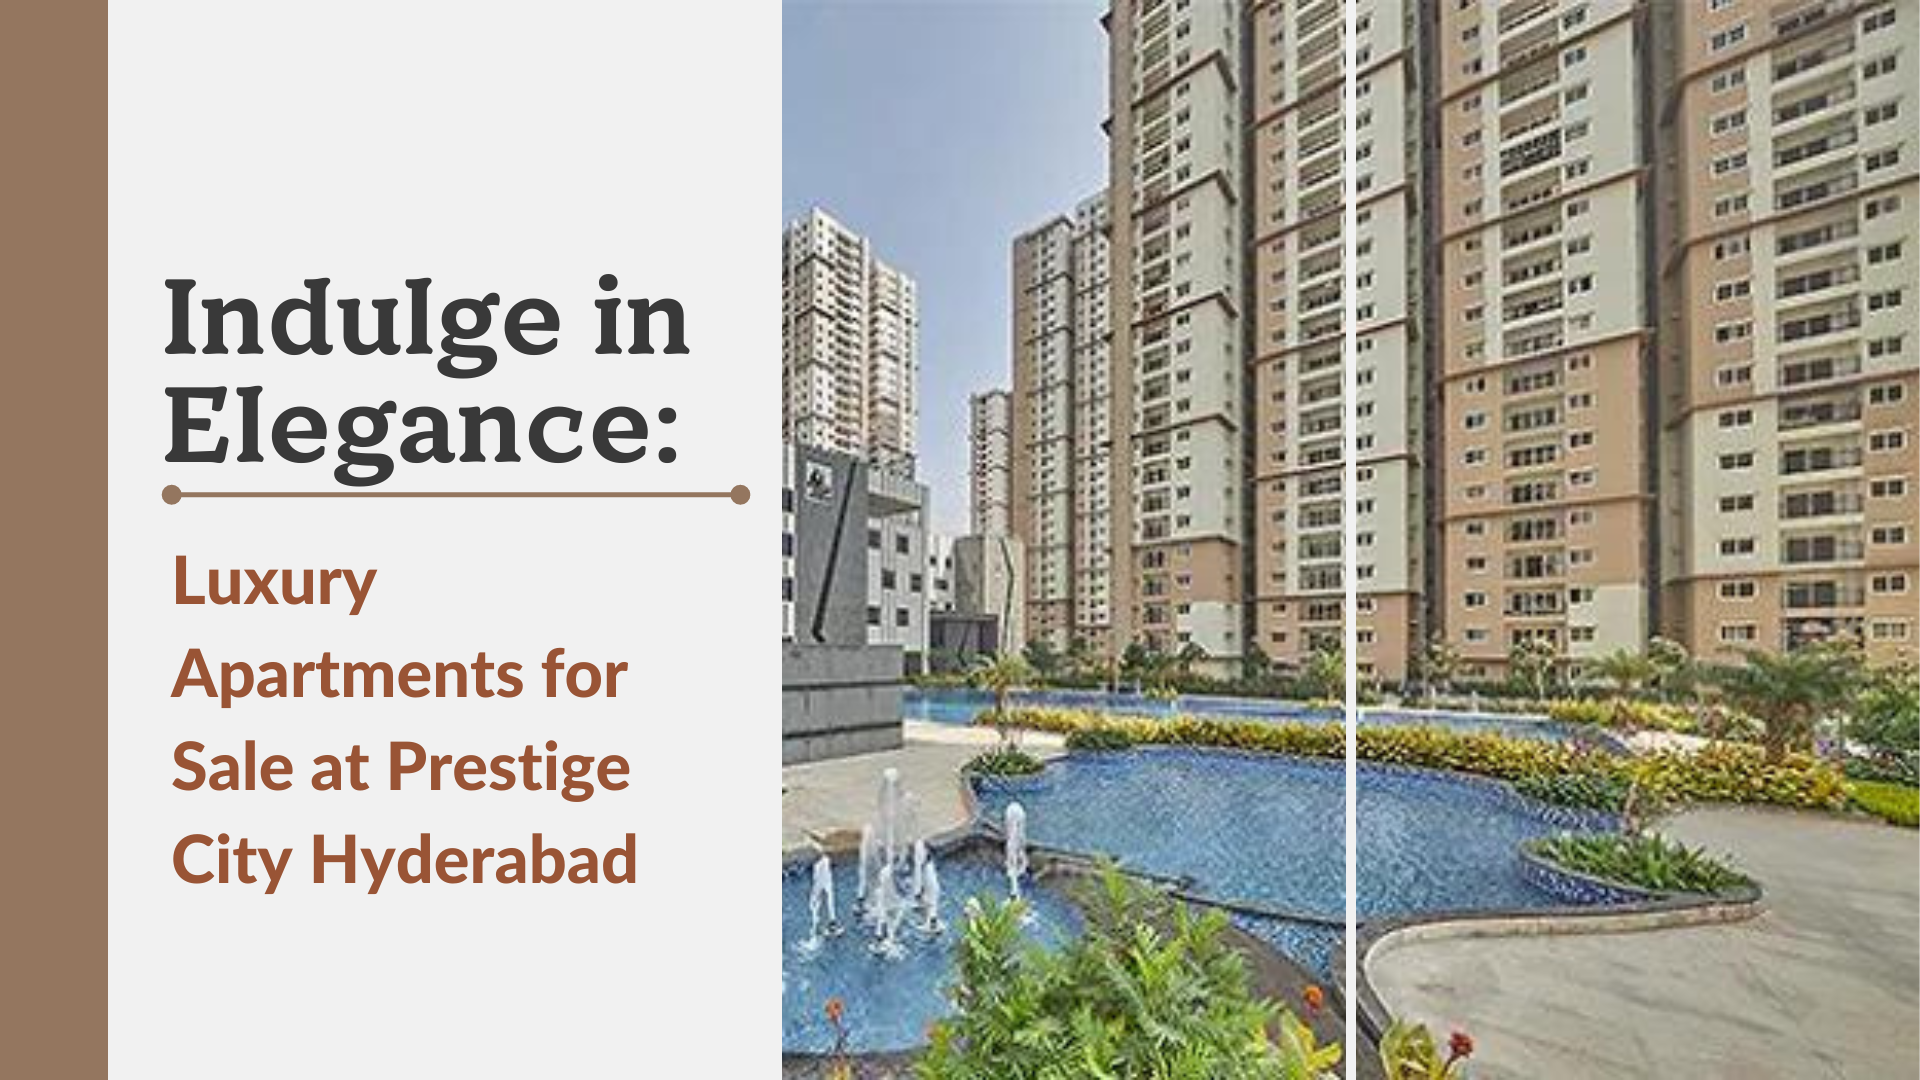 Indulge in Elegance: Luxury Apartments for Sale at Prestige City Hyderabad